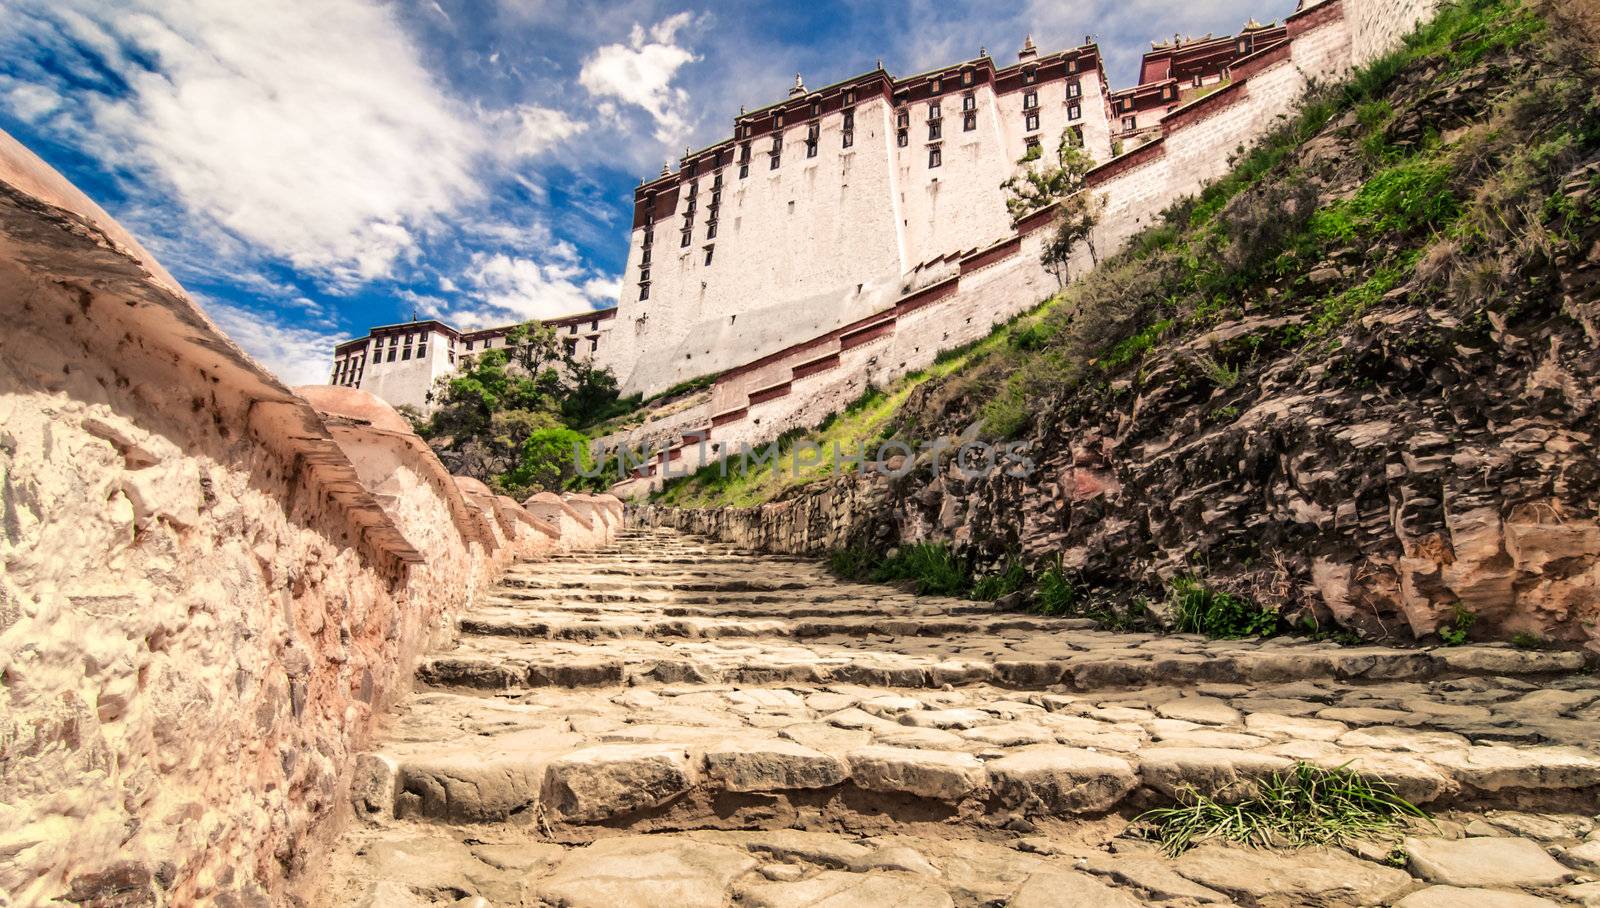 Potala temple view with blue sky and white clouds and stairs, Lhasa, Tibet